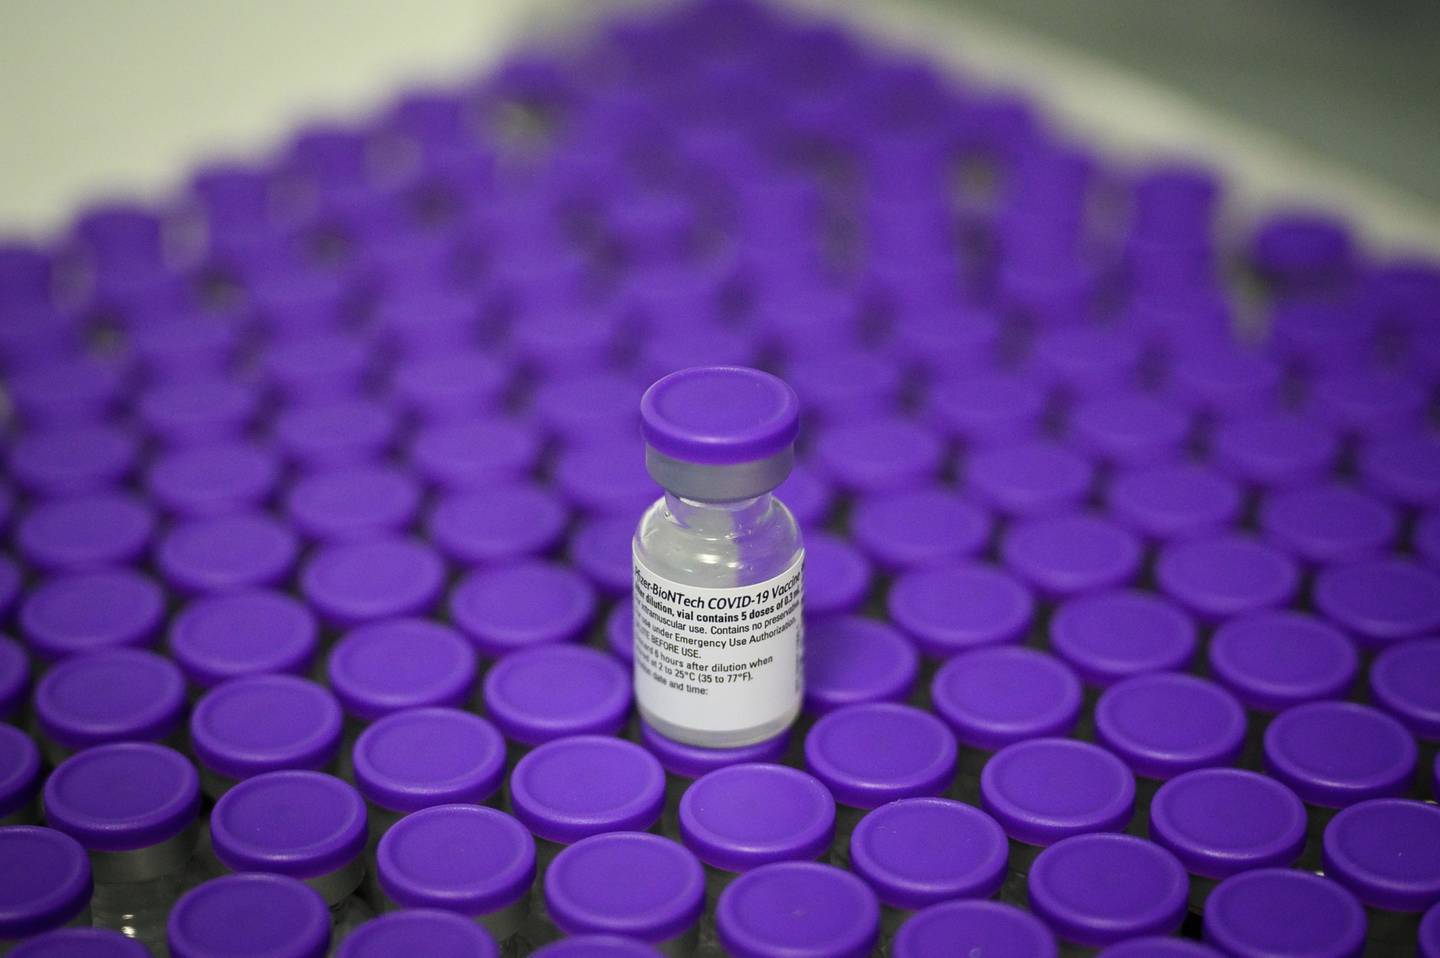 STRATFORD, ENGLAND - DECEMBER 15: Vials of the Pfizer/BioNTech Covid-19 vaccine are seen during a vaccination clinic at the Sir Ludwig Guttmann Health and Wellbeing Centre on December 15, 2020 in Stratford, England.